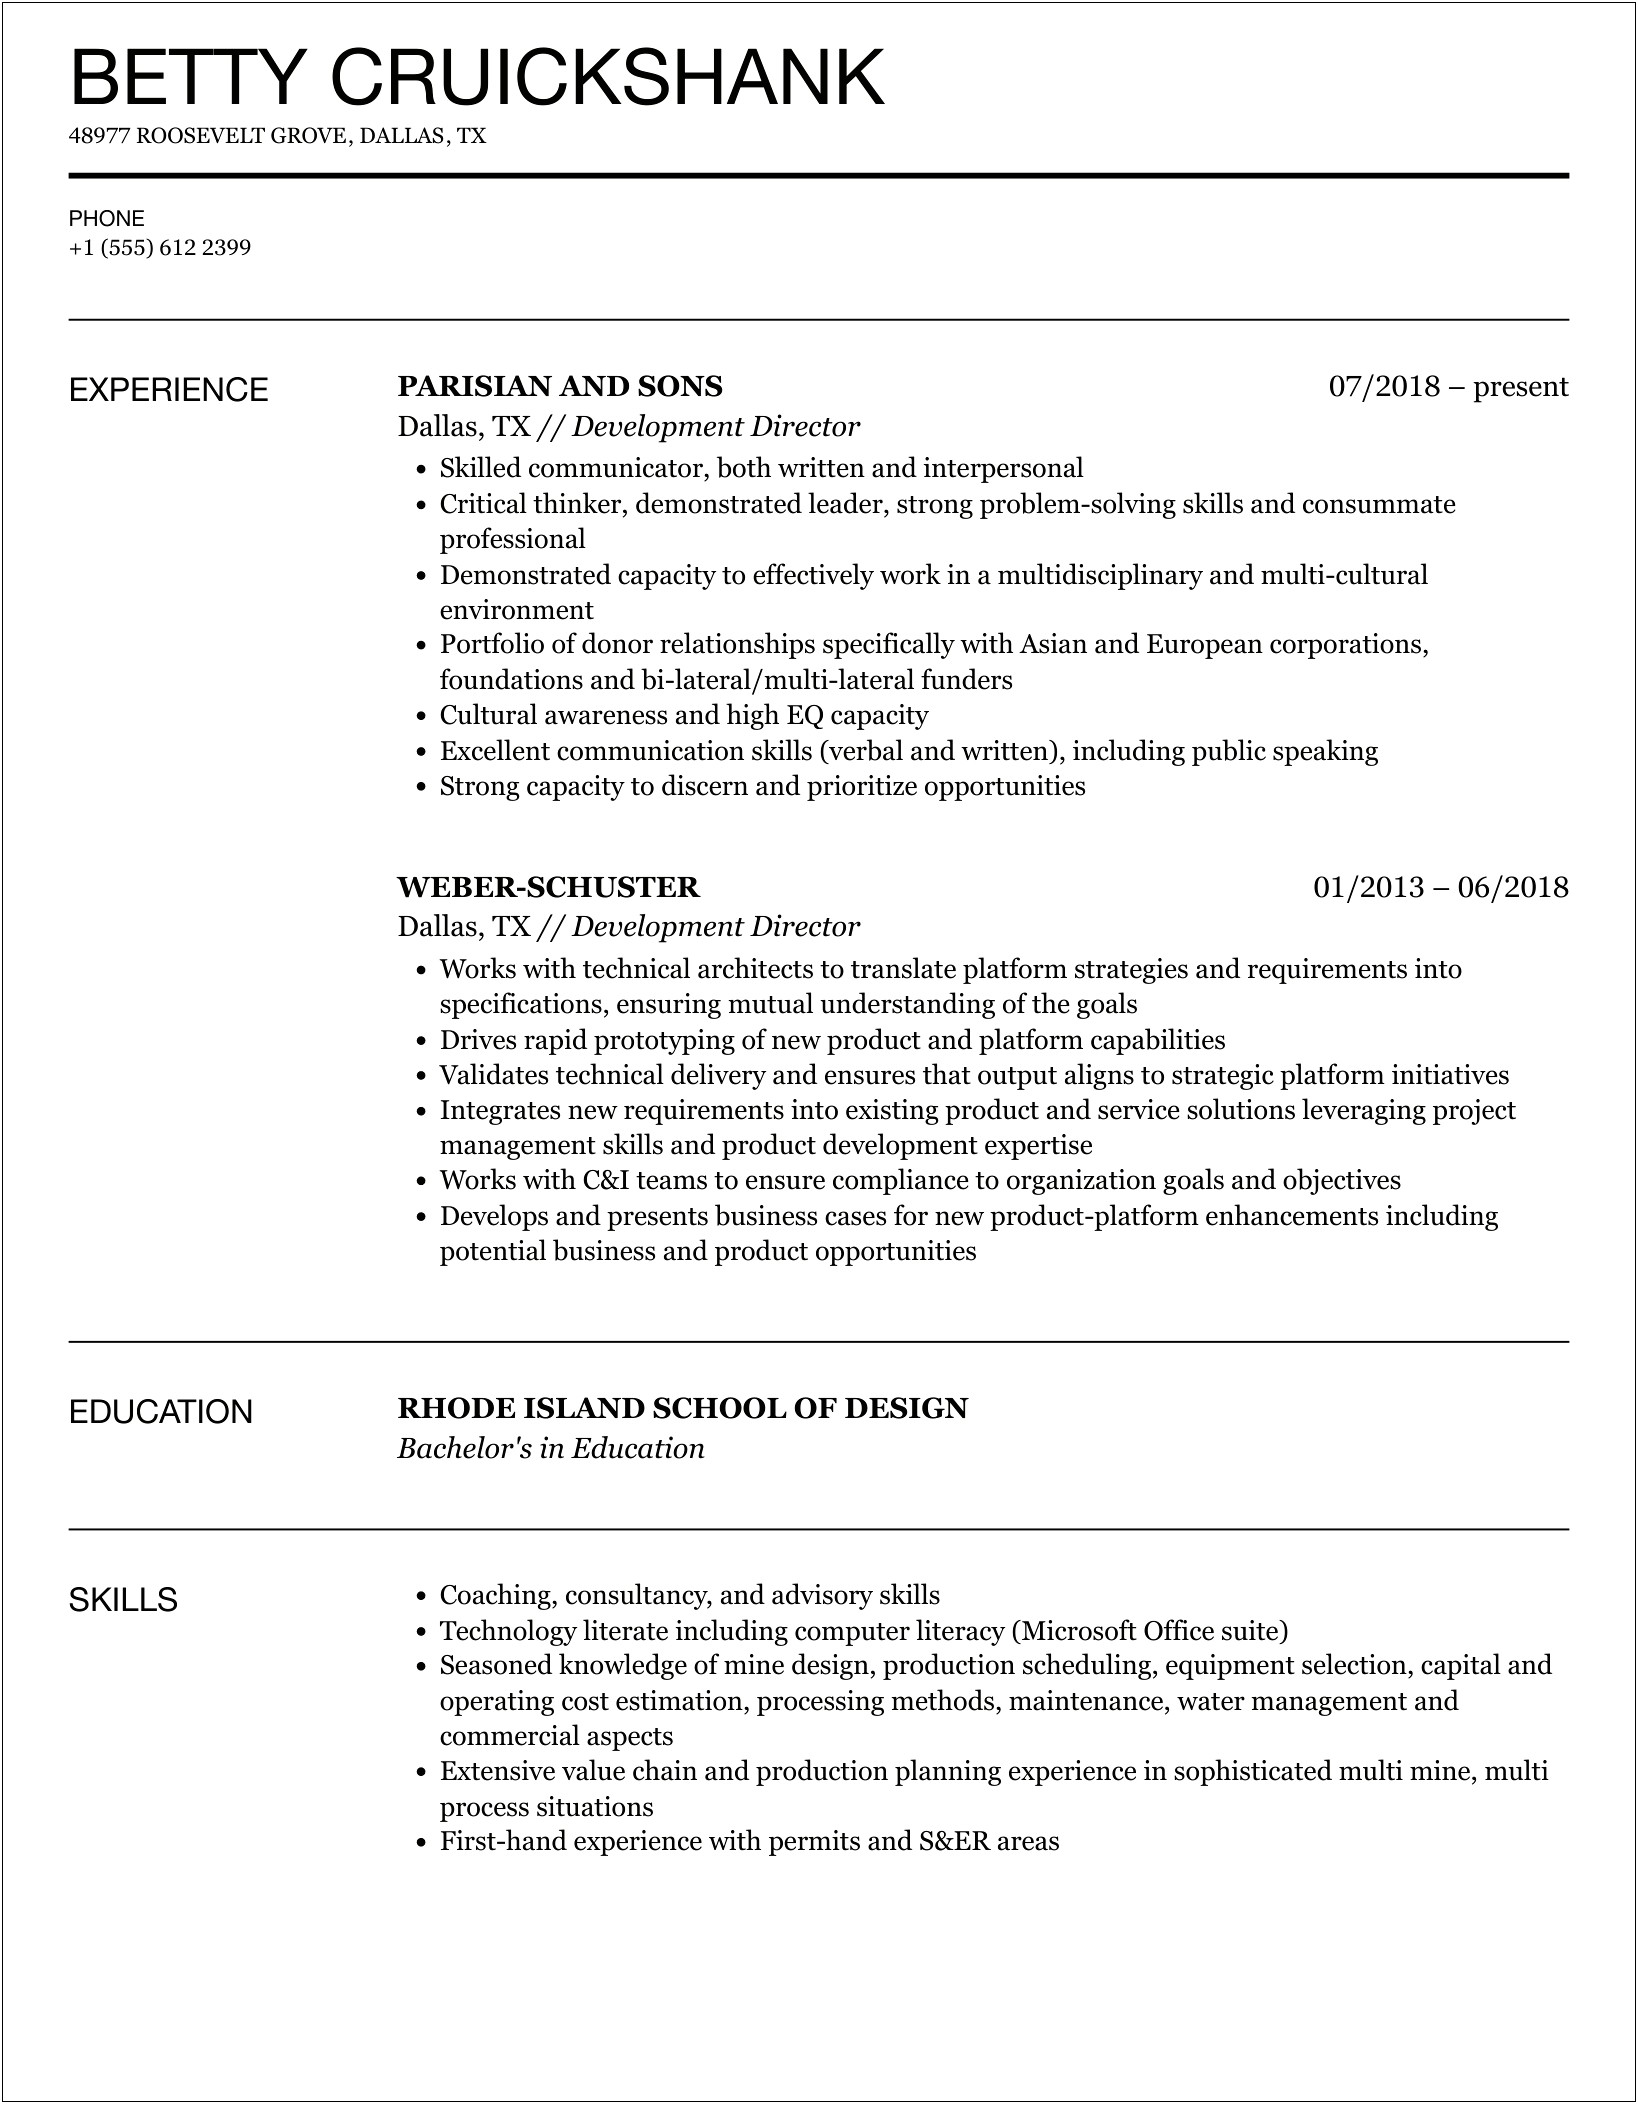 American Cancer Society Community Development Manager Resume